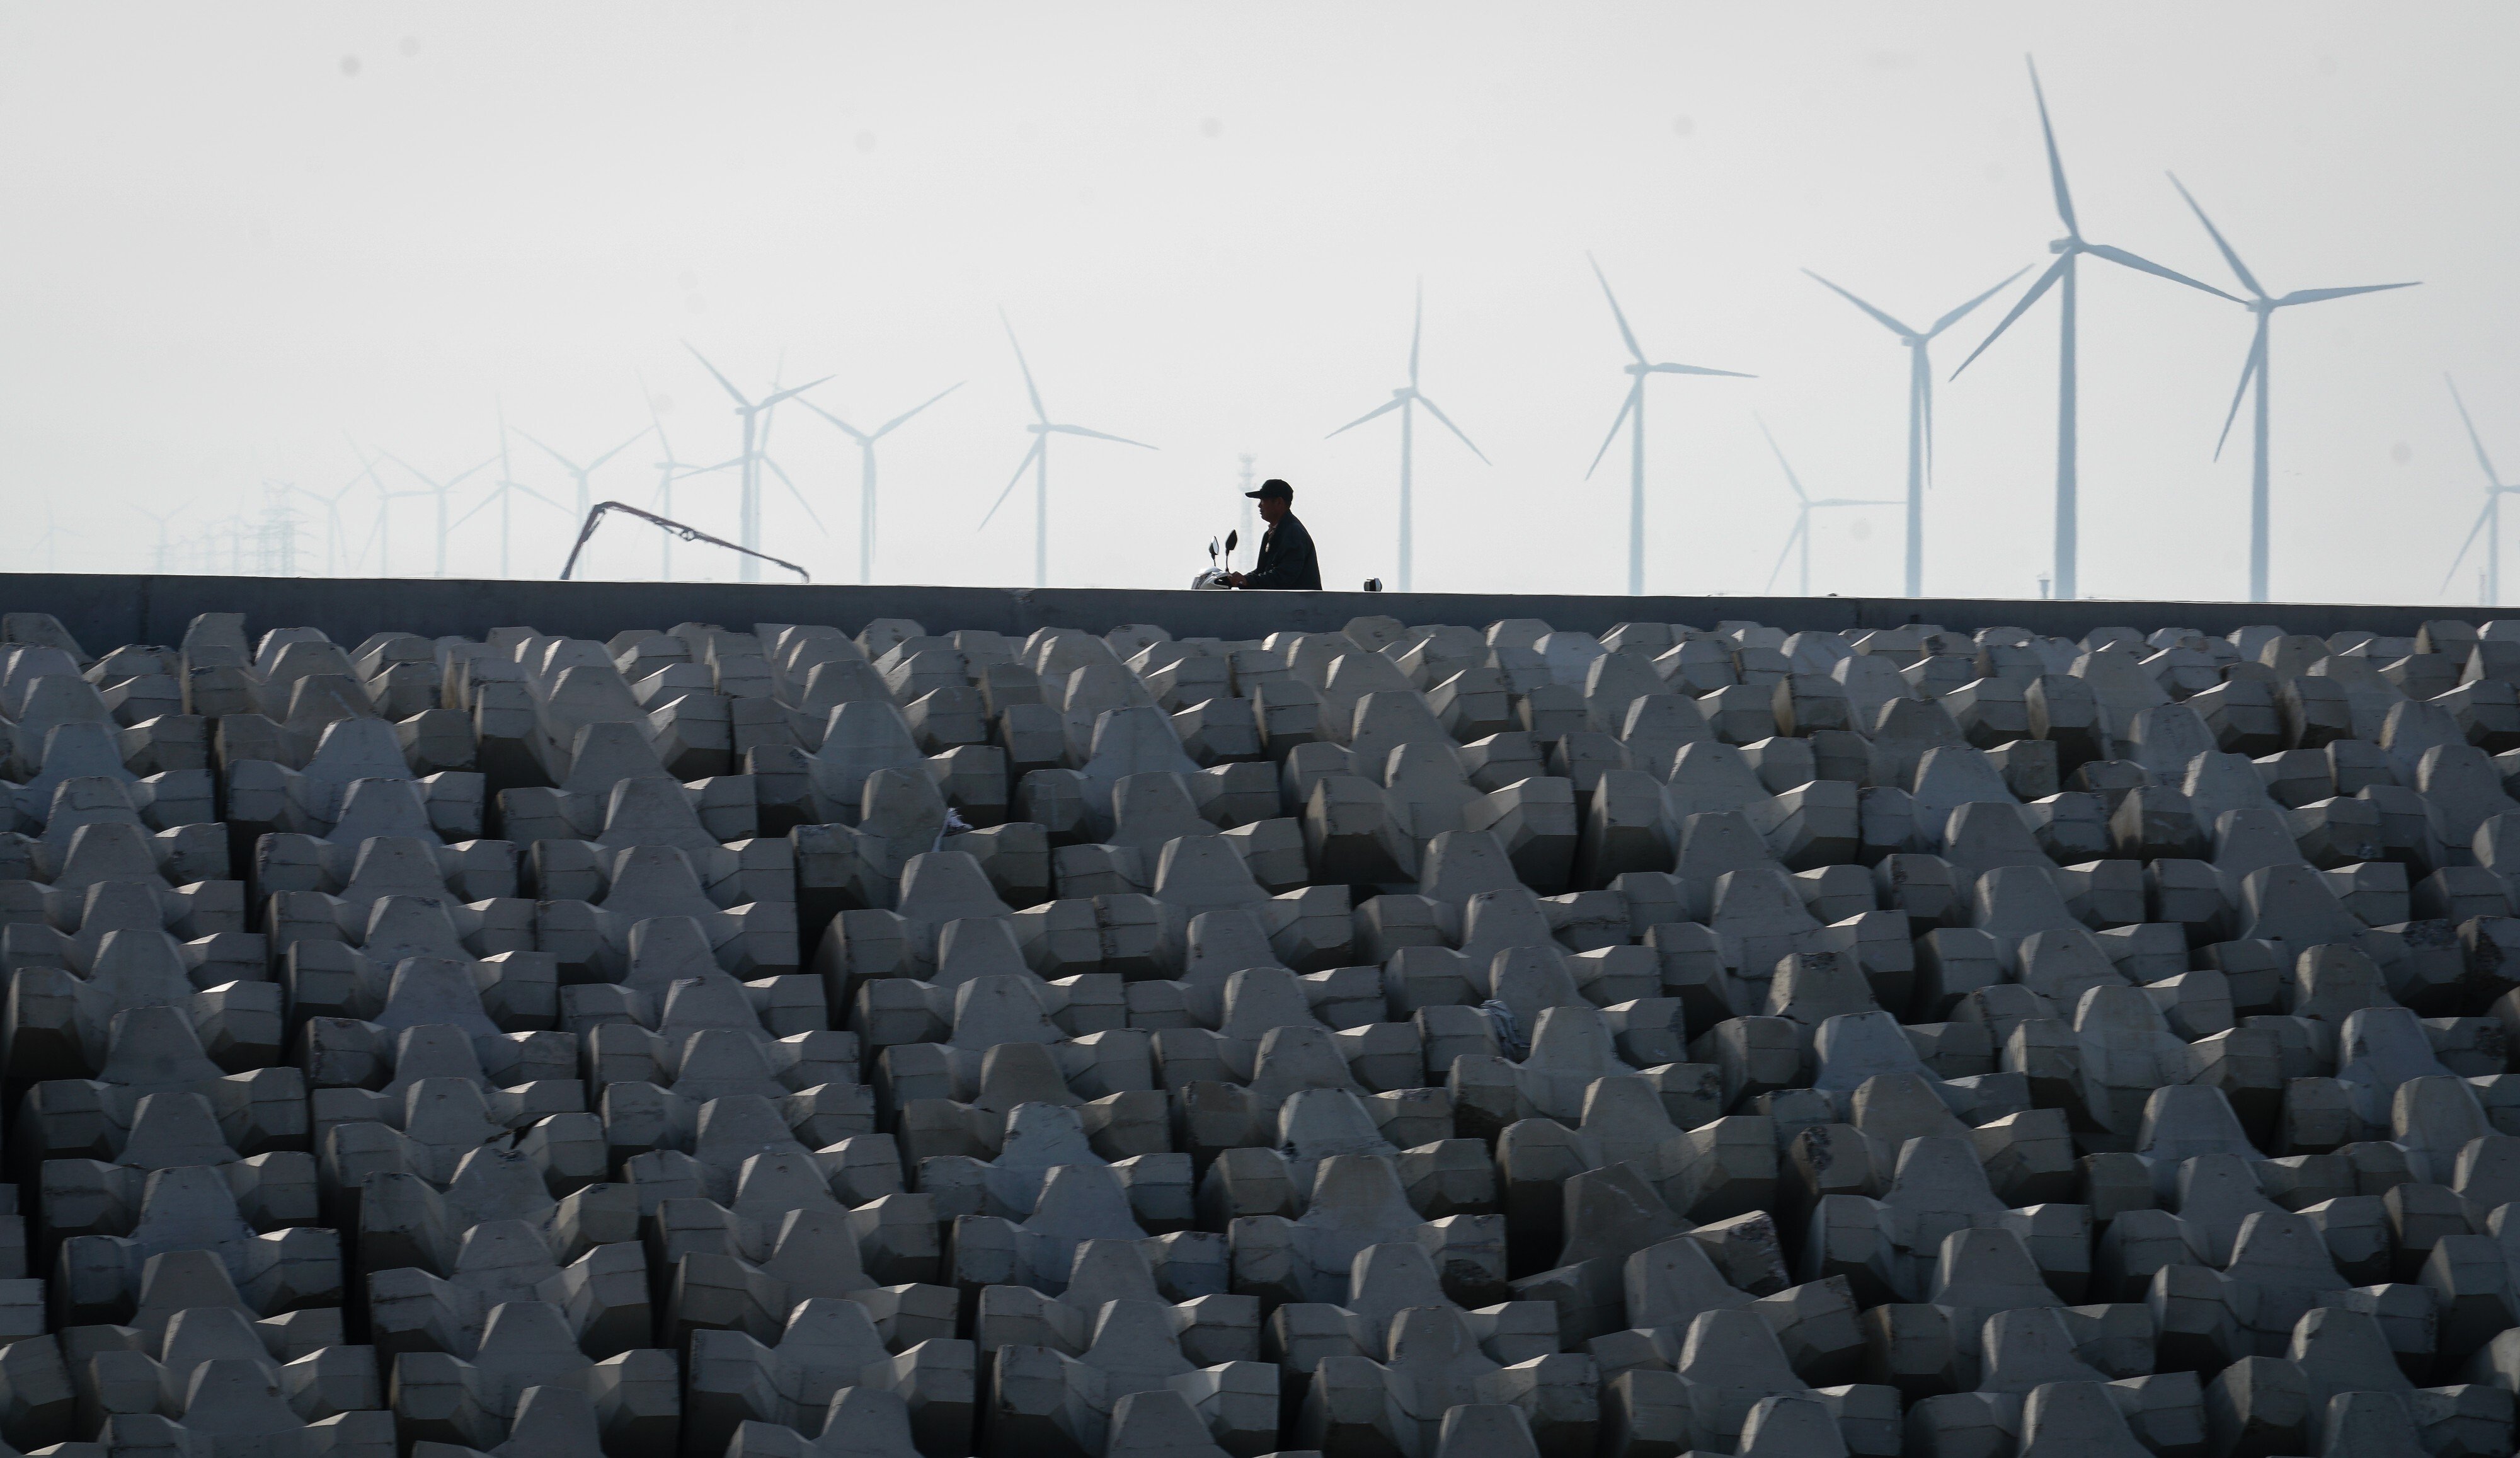 A rider passes by a wind power station in Rudong county in east China’s Jiangsu province in June 2018. The county has built 18 wind power stations containing around 800 wind turbines. Photo: Xinhua